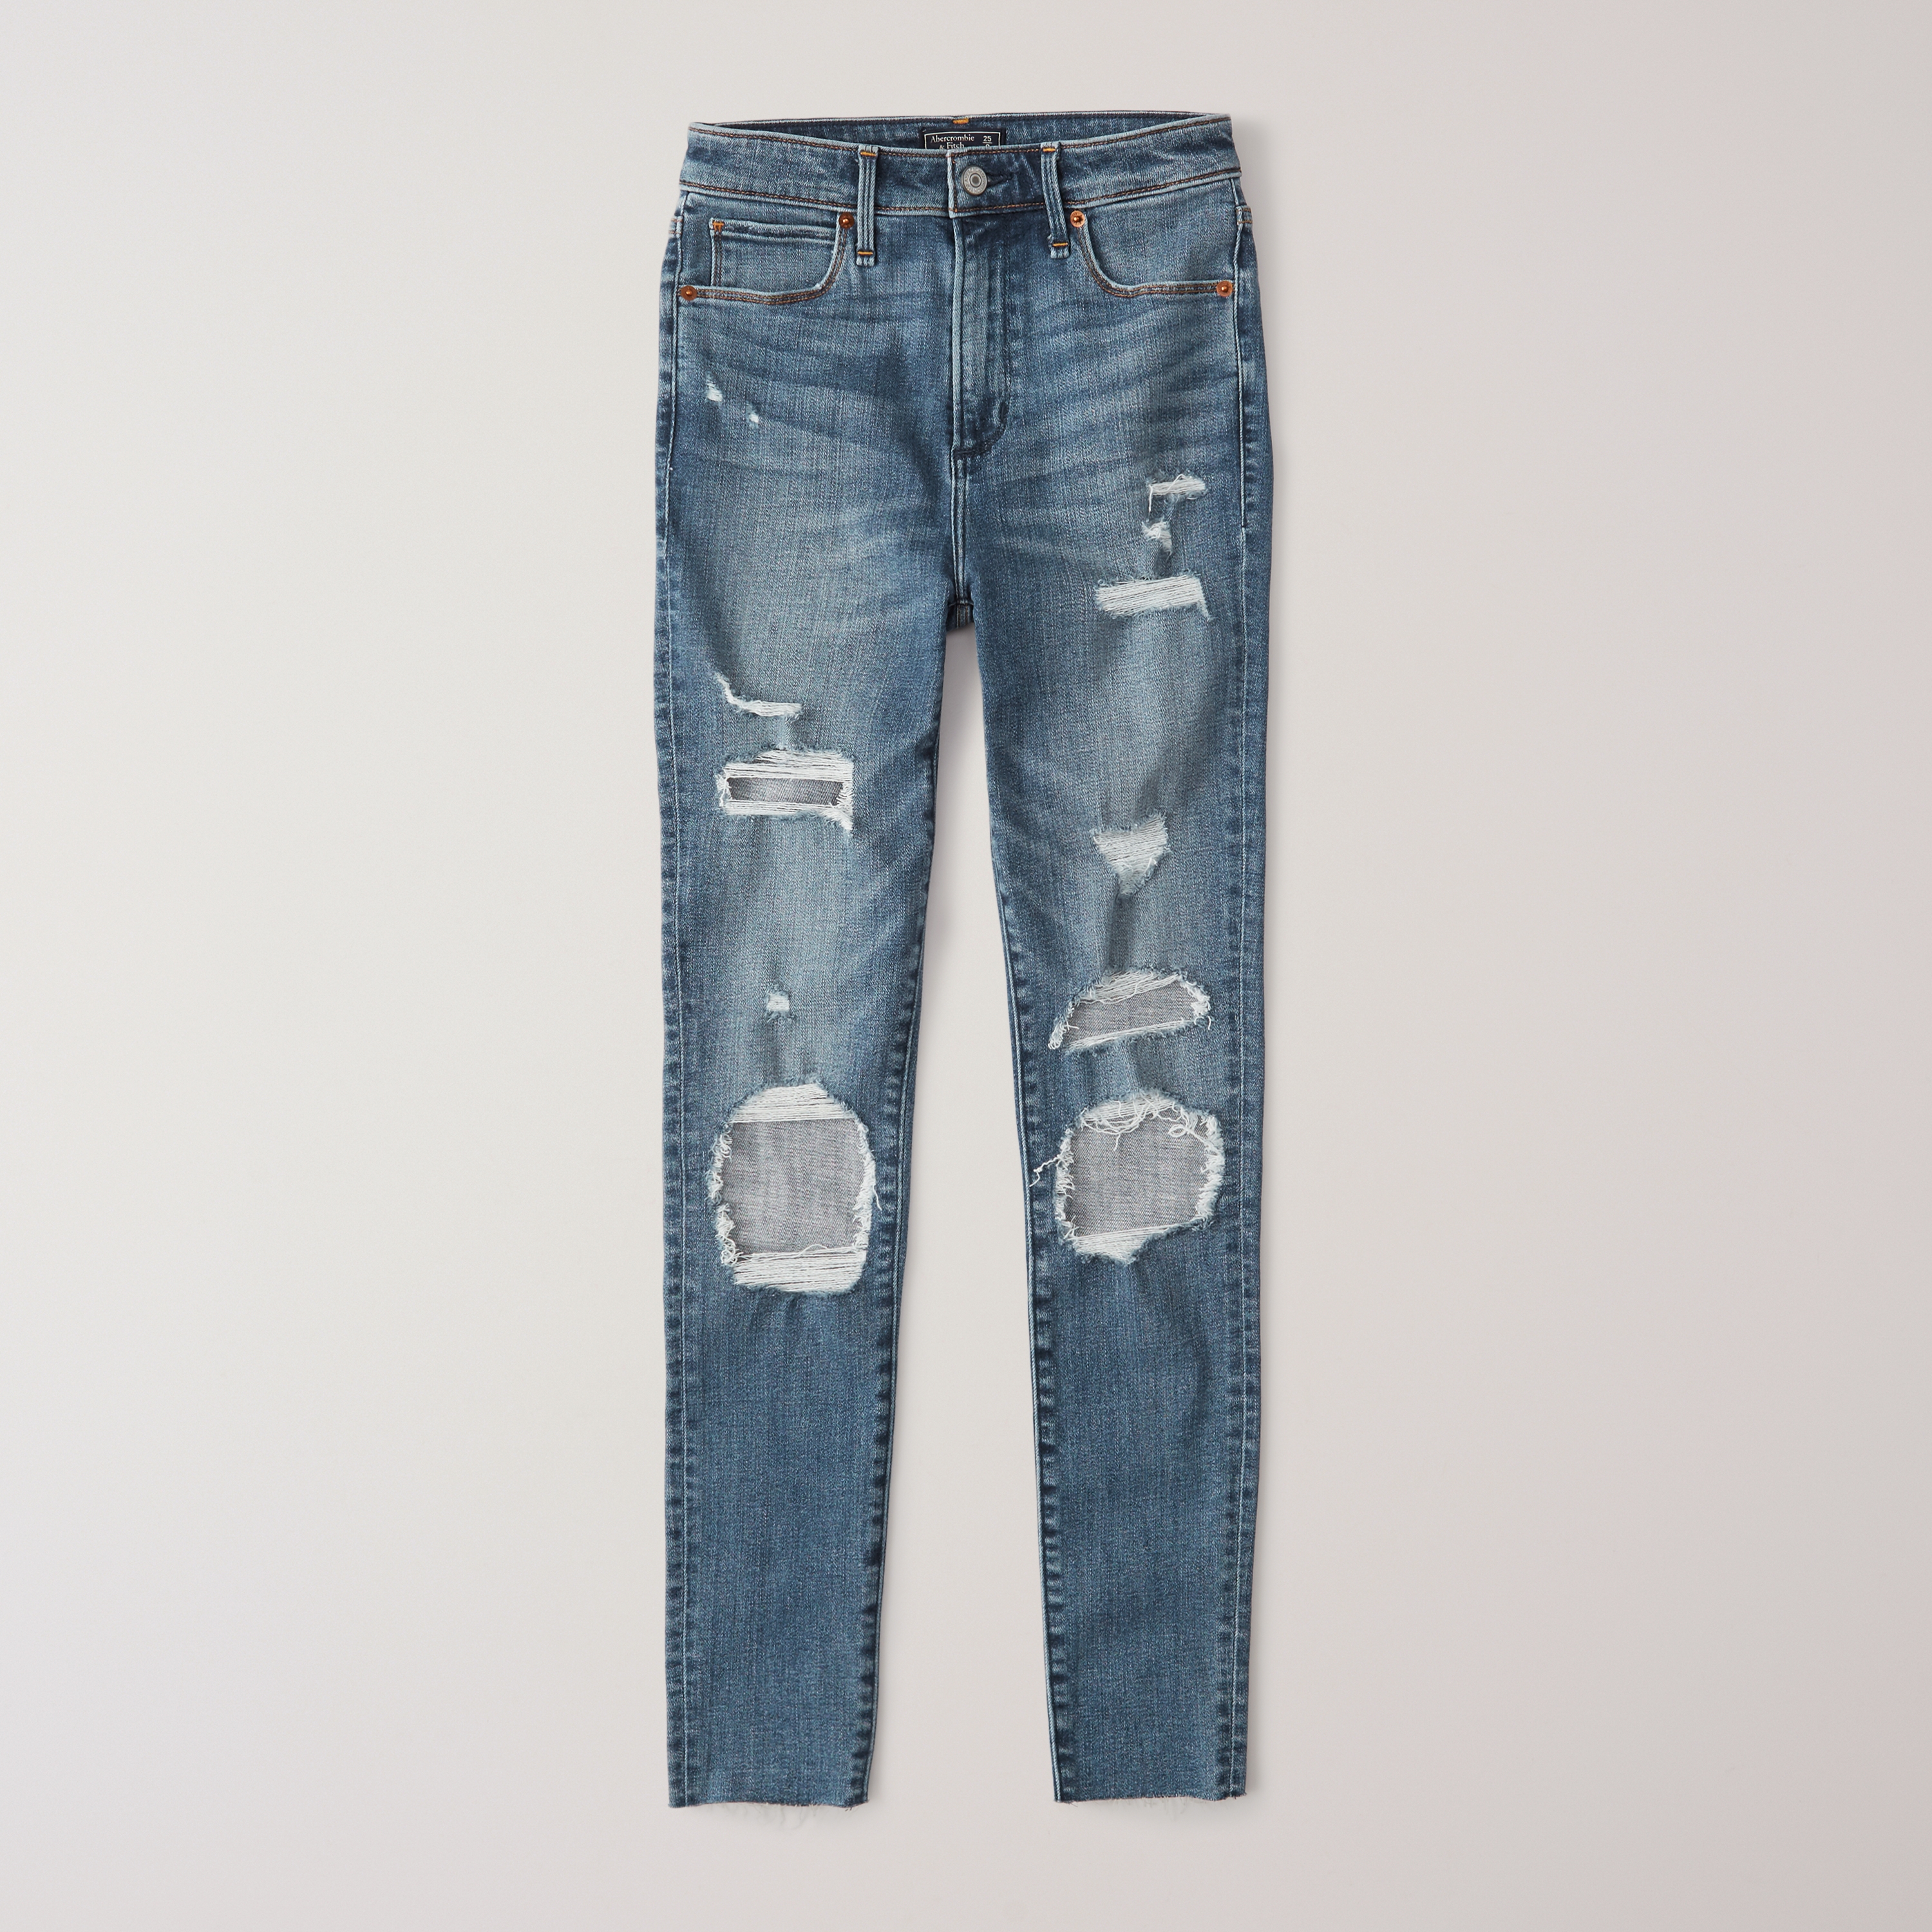 abercrombie and fitch simone jeans review